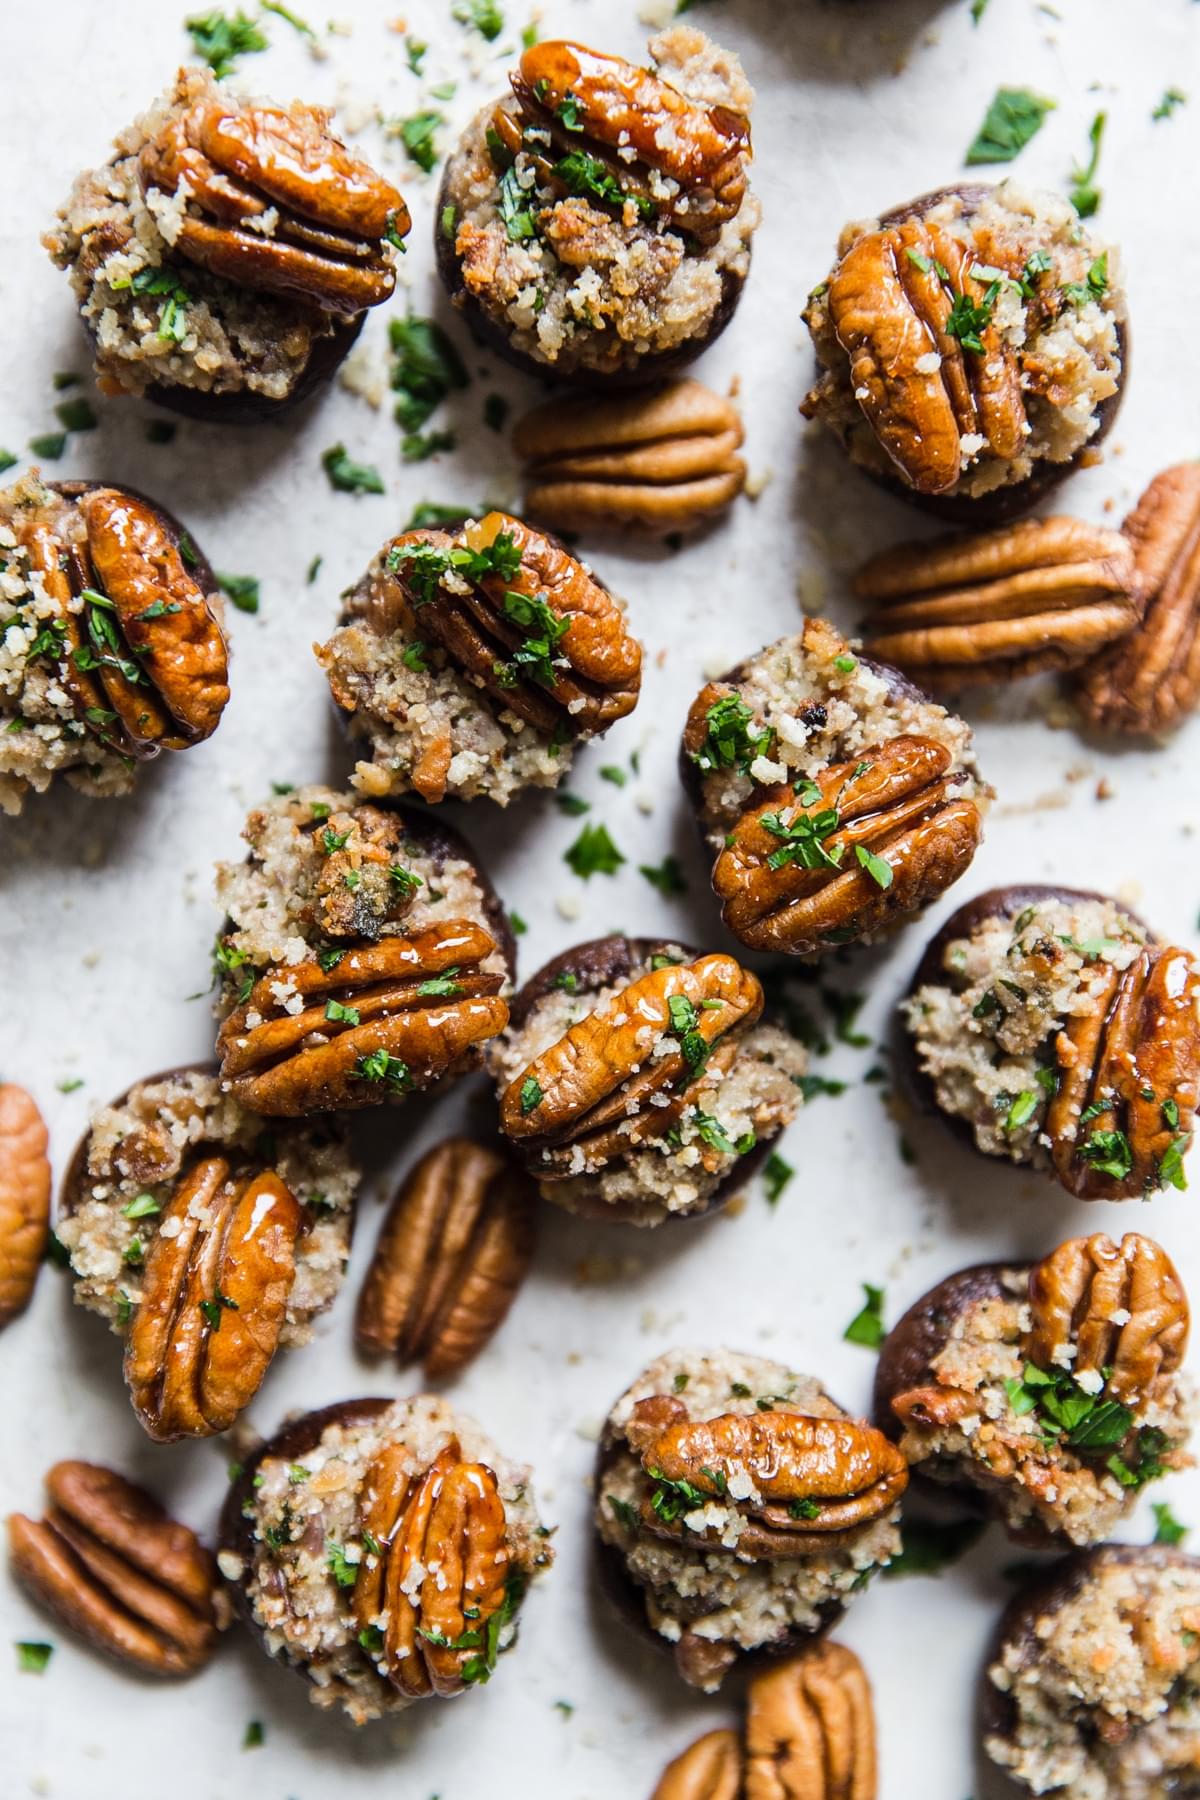 Goat Cheese And Pecan Stuffed Mushrooms with candied pecans